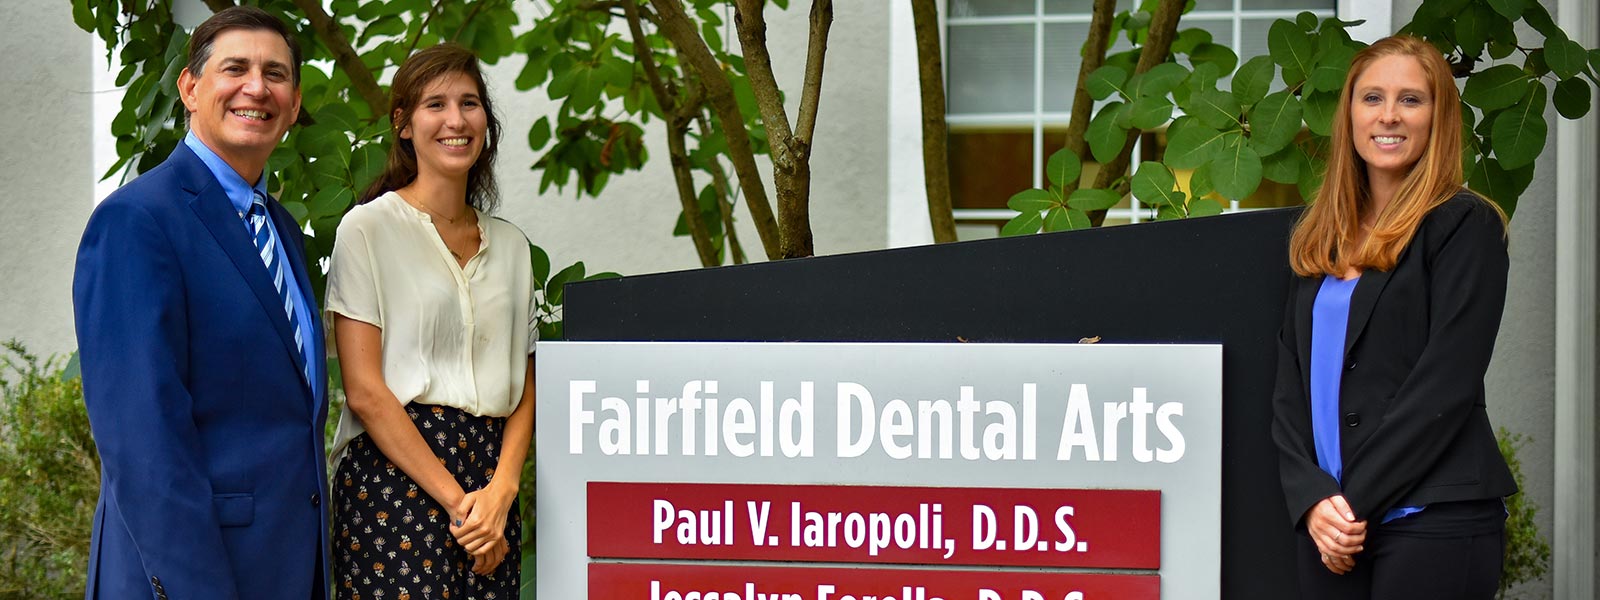 Fairfield Dental Arts staff next to the Fairfield Dental Arts sign, Jeannine Donahue on the right and Jessalyn Forella on the left.